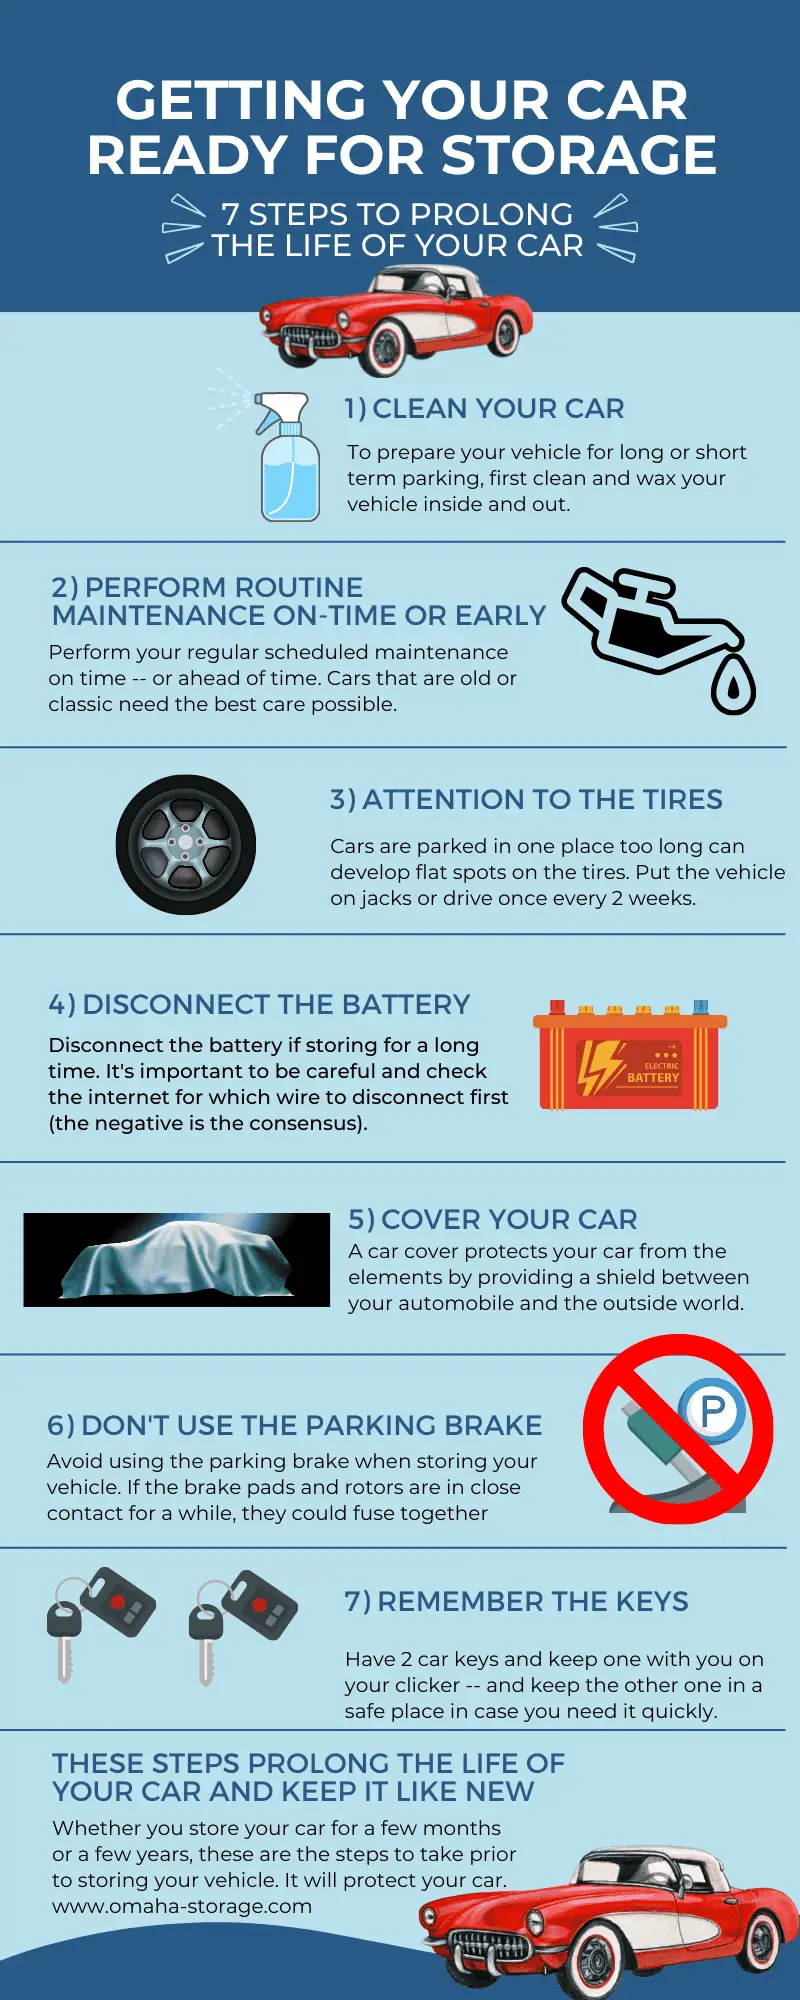 Getting your car ready for storage